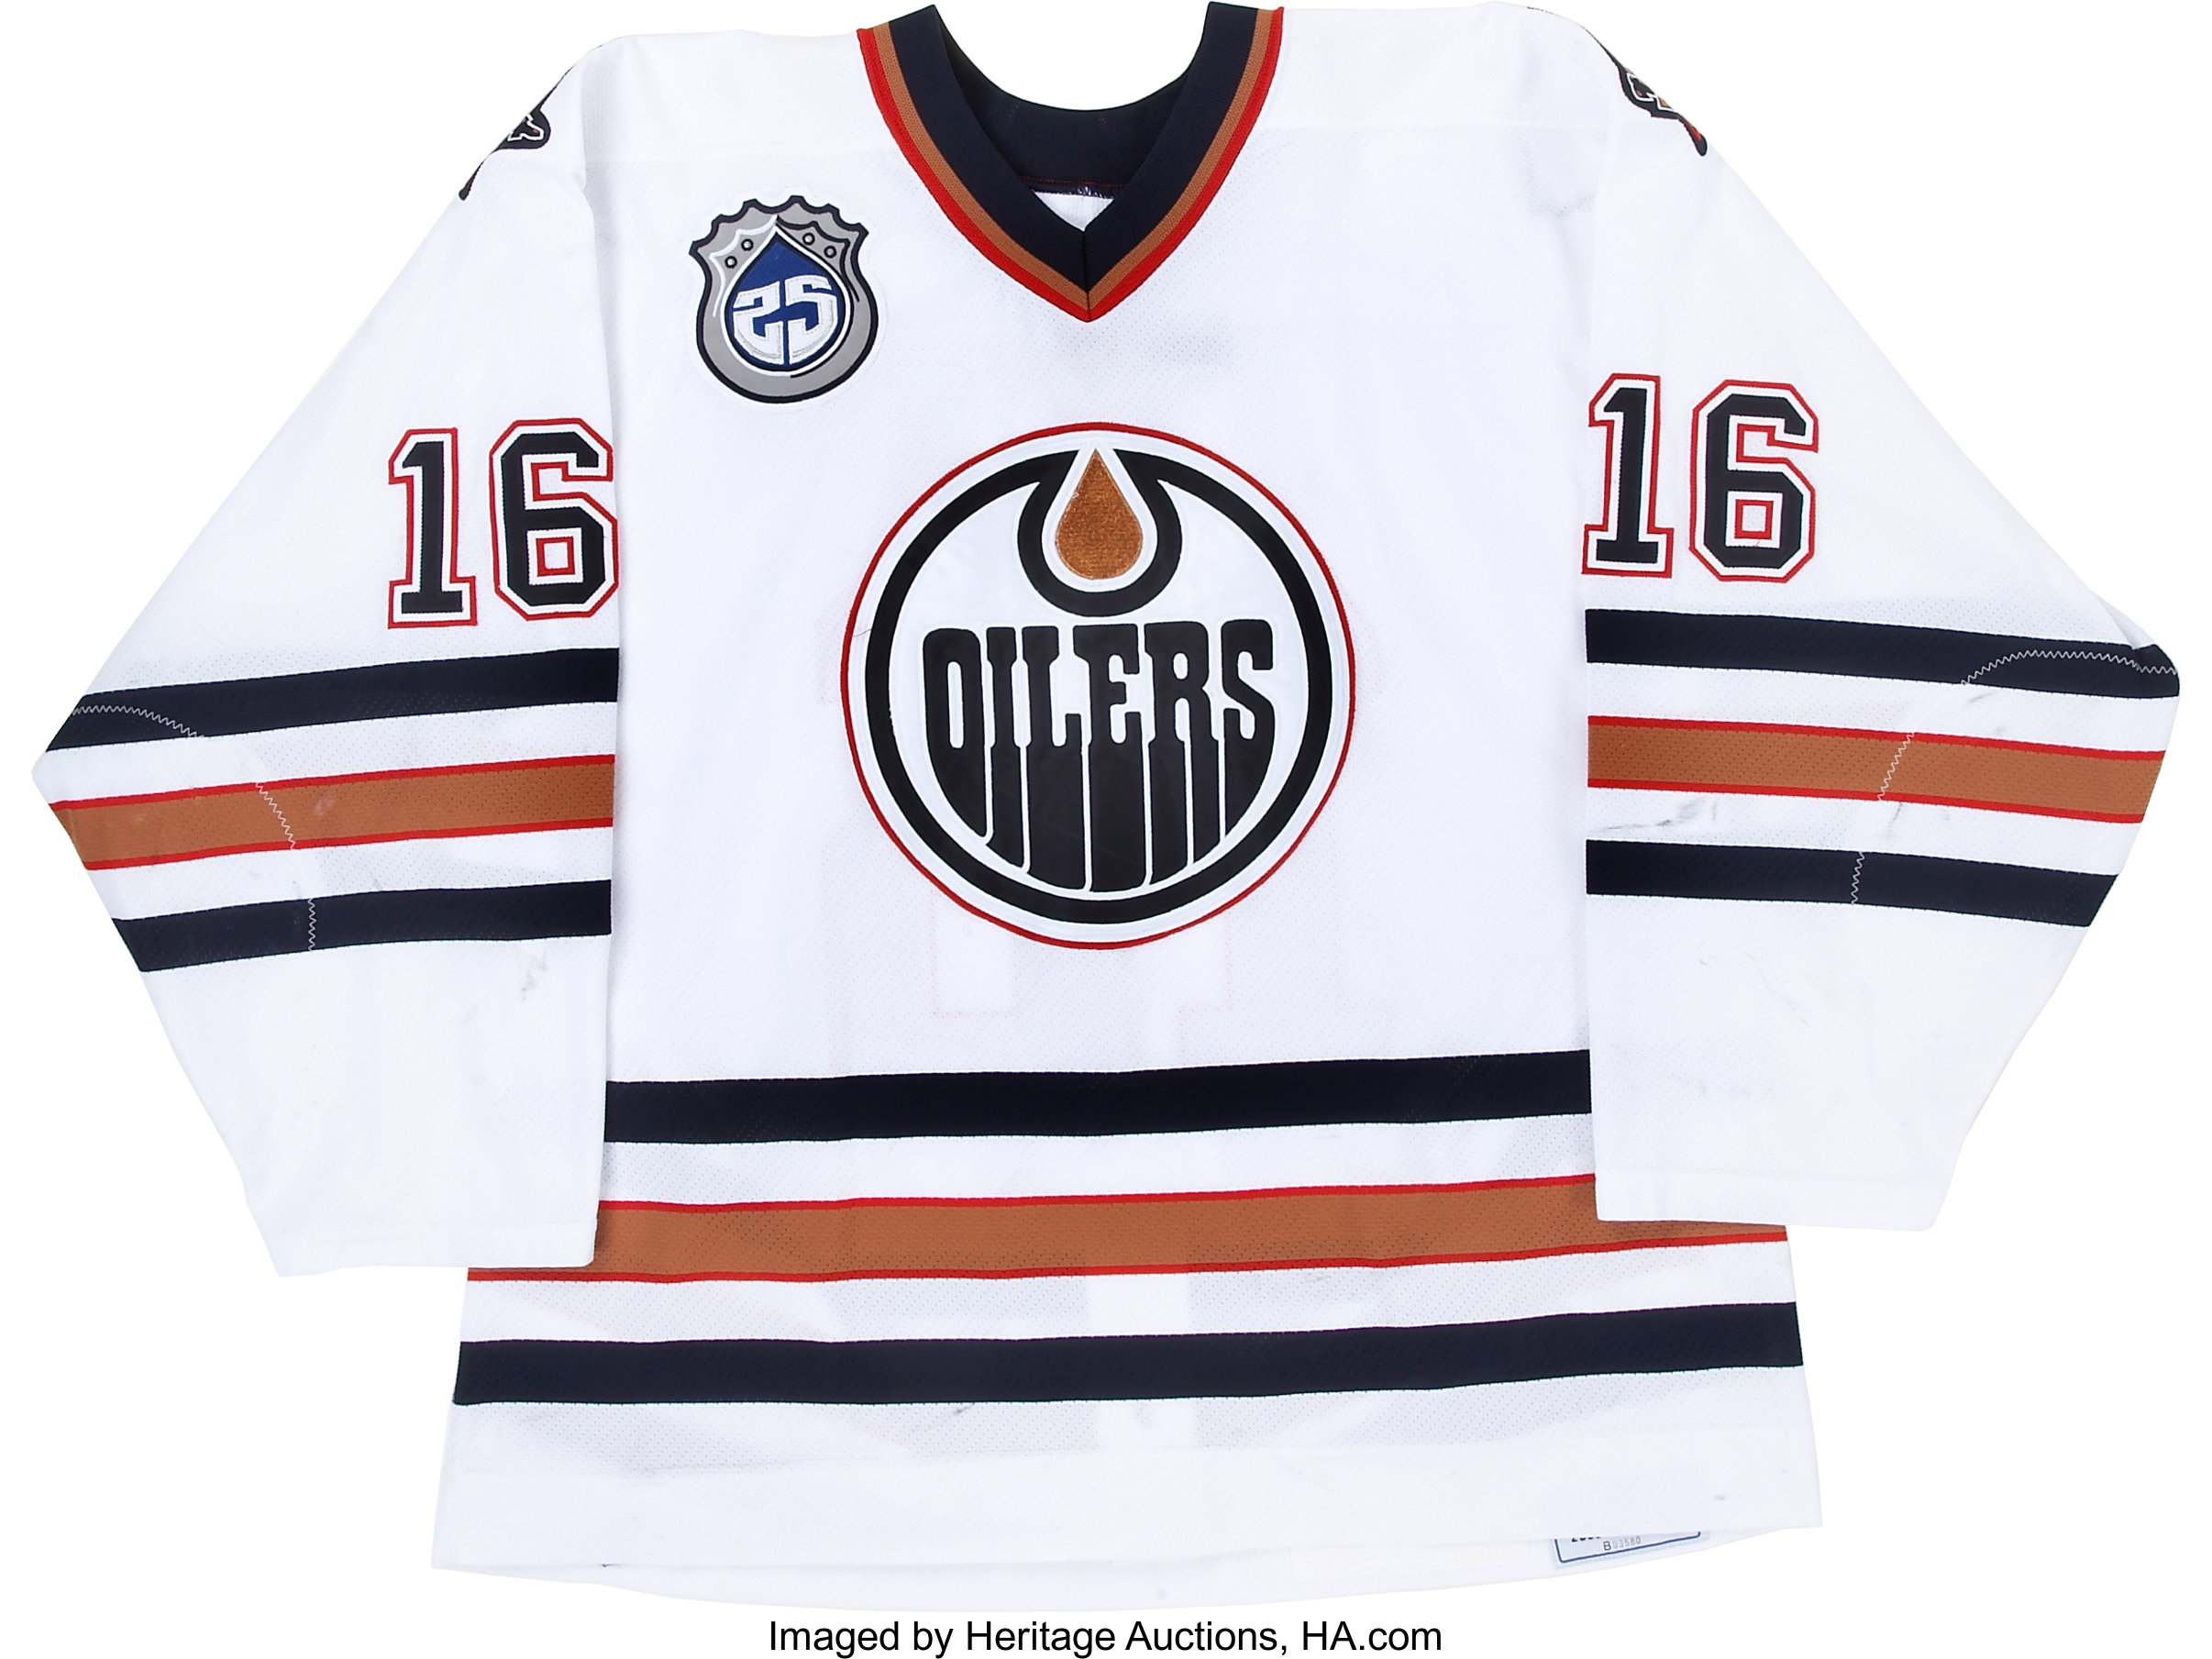 Edmonton Oilers 2001-02 3rd jersey artwork, This is a highl…